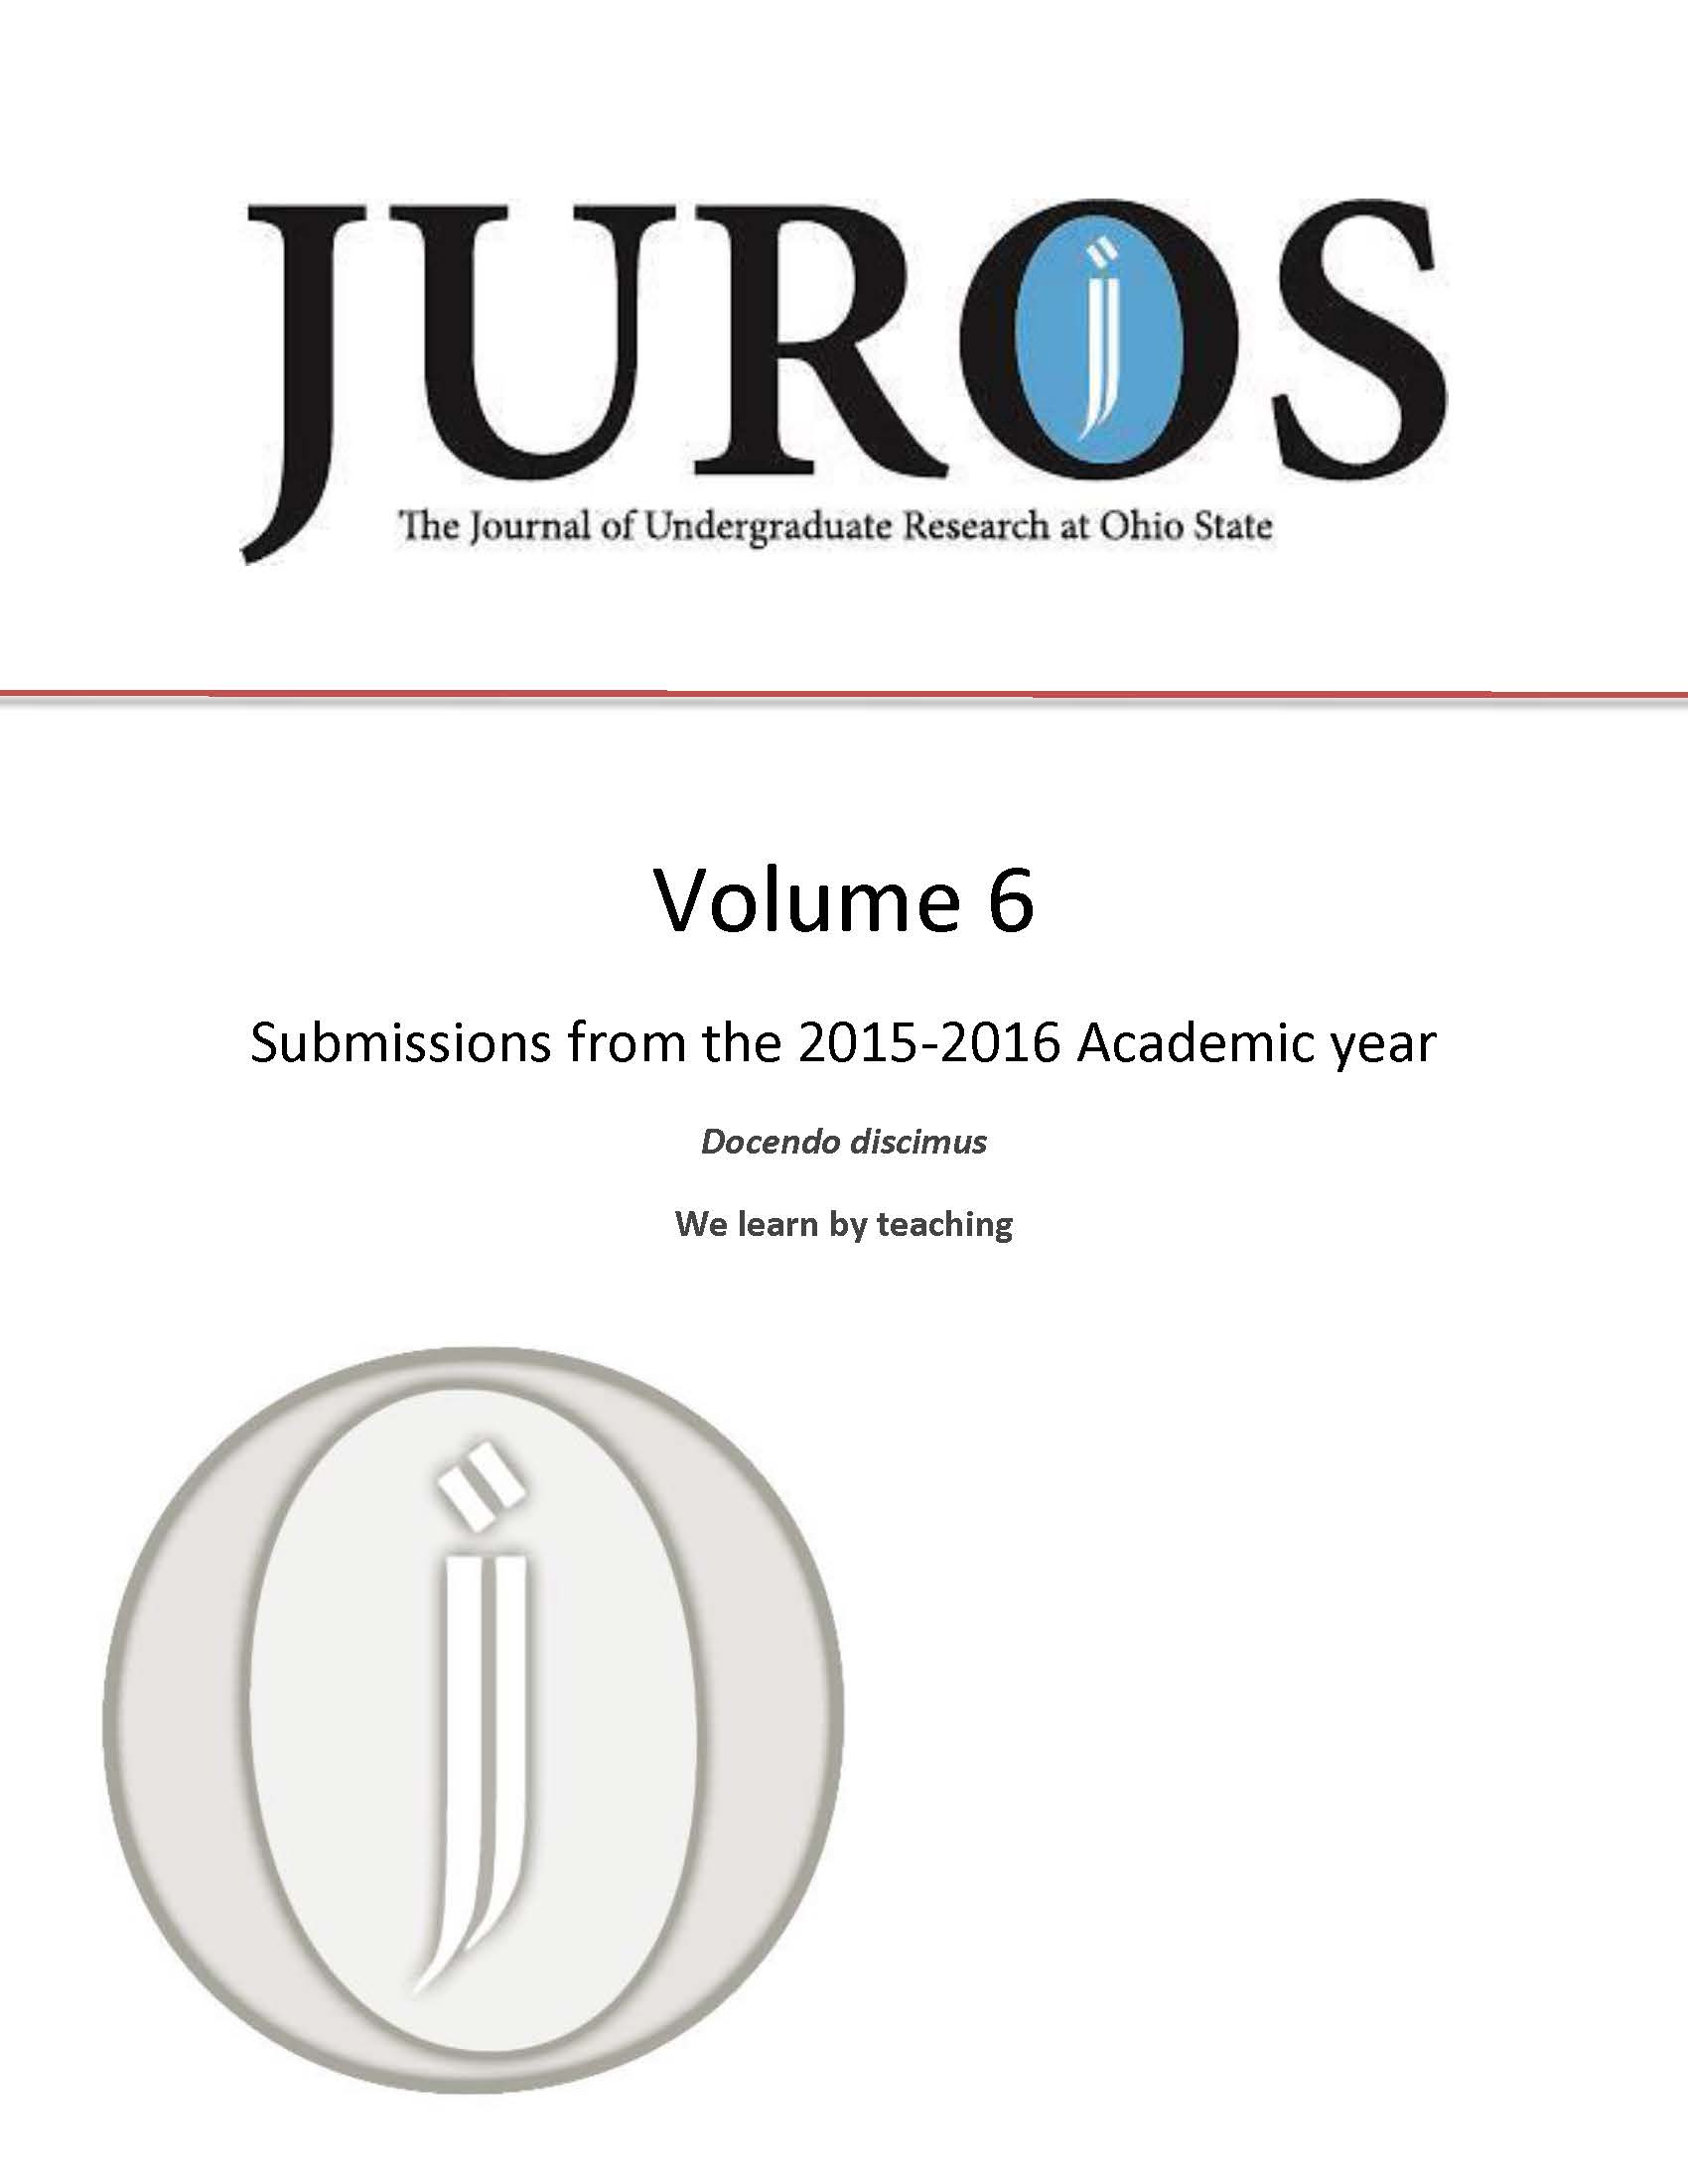 Cover image for the Journal of Undergraduate Research at Ohio State, Volume 6